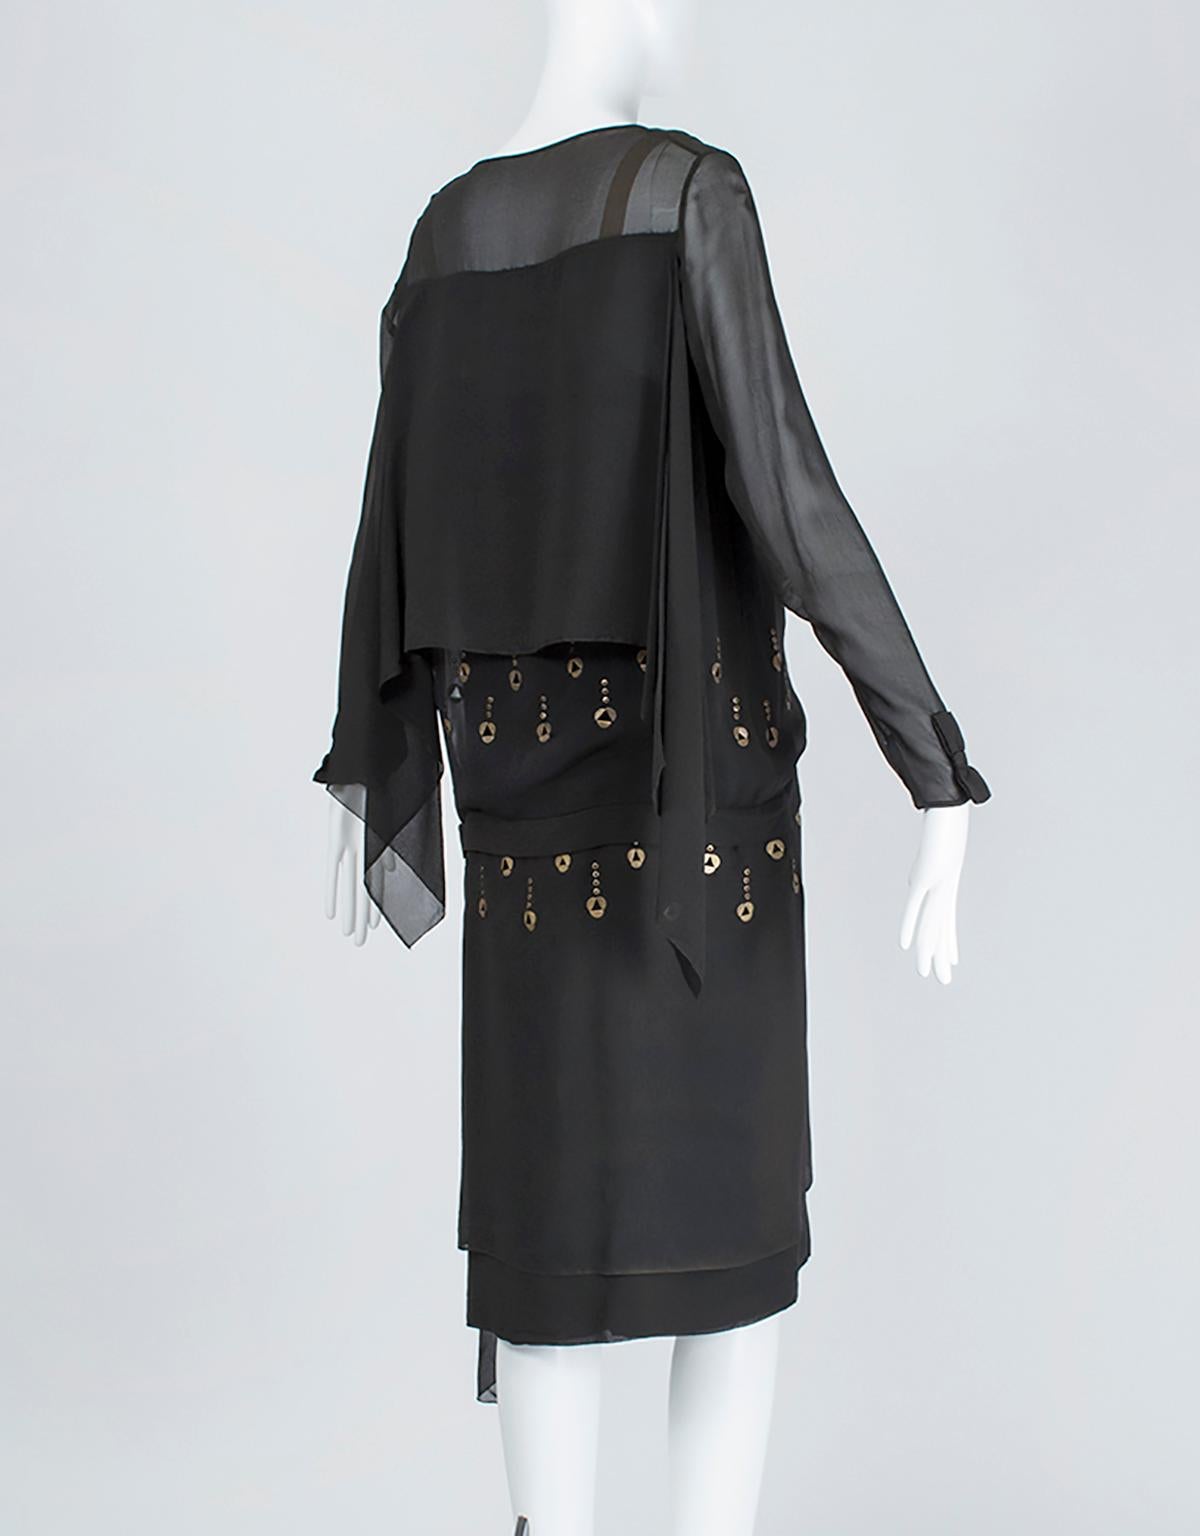 A dress that went around the world in 1924, this unusual frock features metal eyelets that gently chime when the wearer moves. An exotic masterpiece worthy of Callot Soeurs or Paquin.

Vintage knee-length drop waist dress with square neckline and